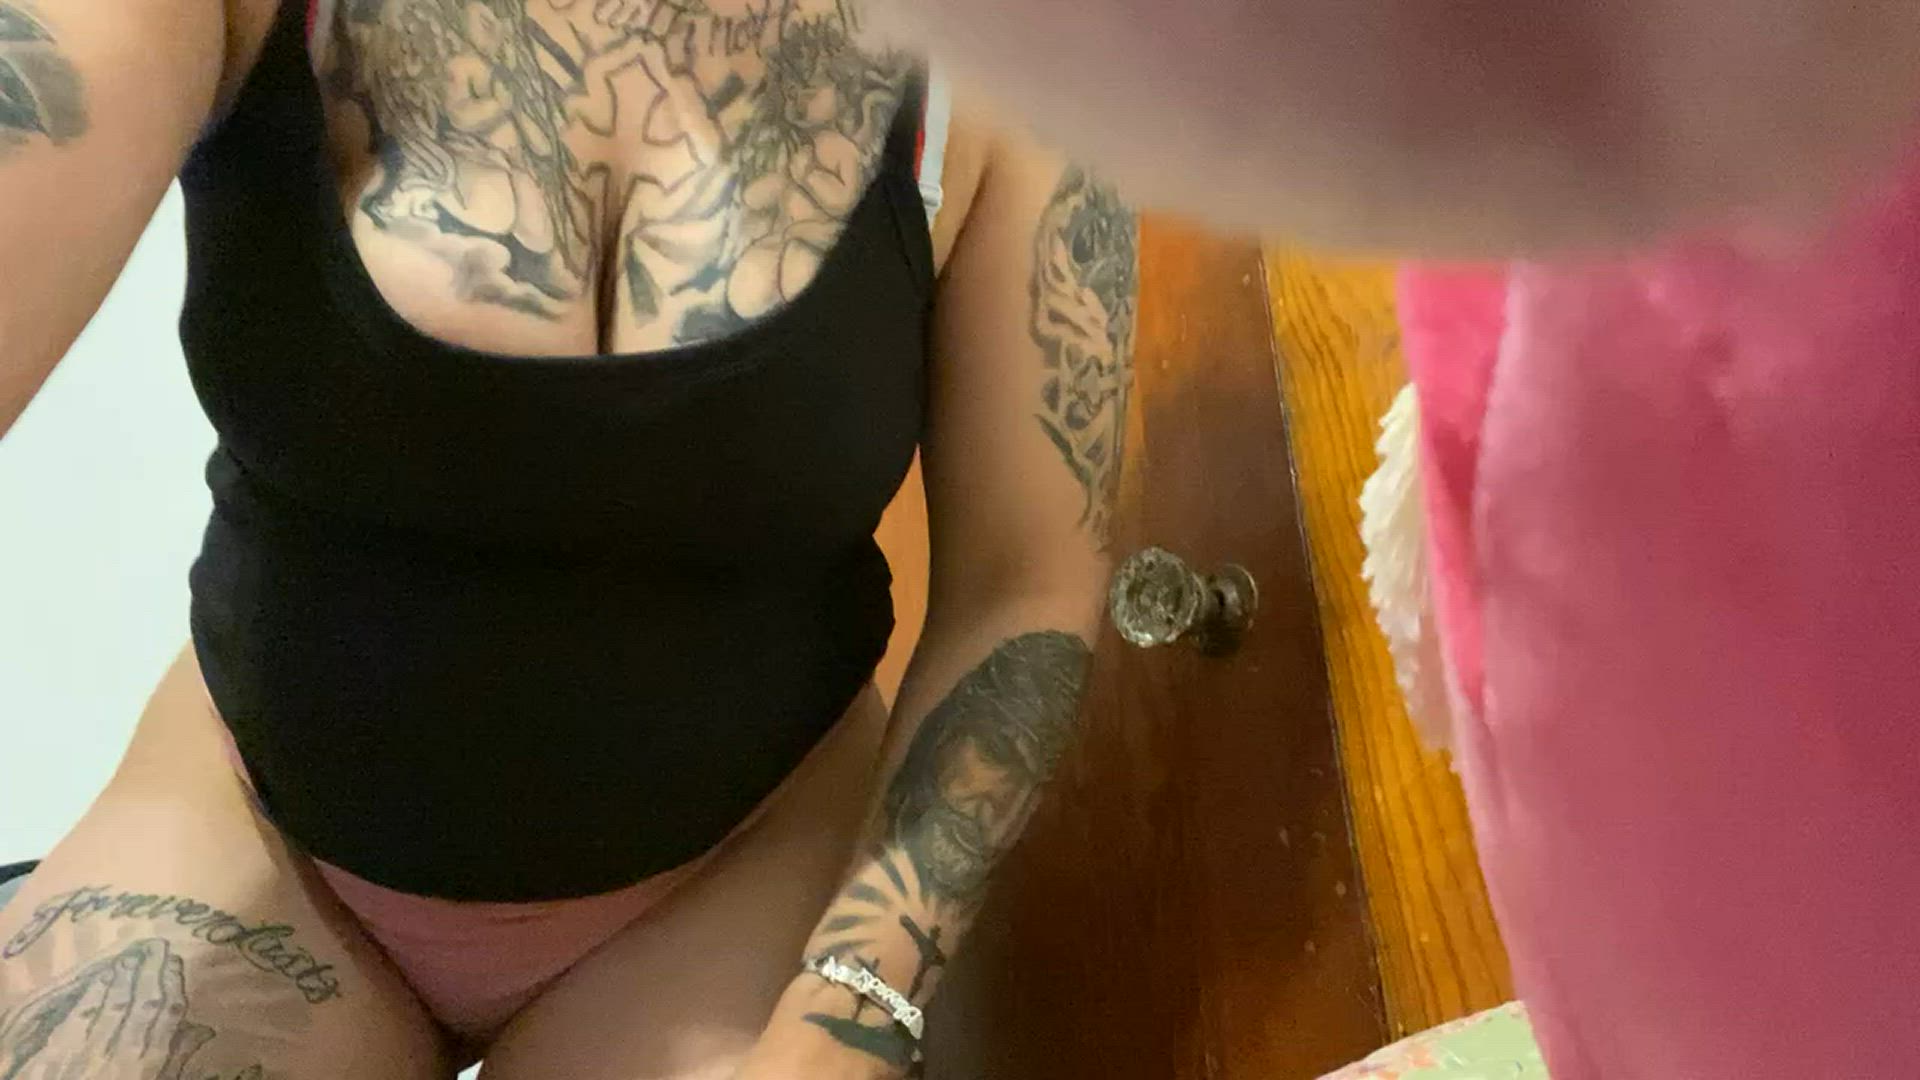 Masturbating porn video with onlyfans model hailey022 <strong>@babygirl0022</strong>